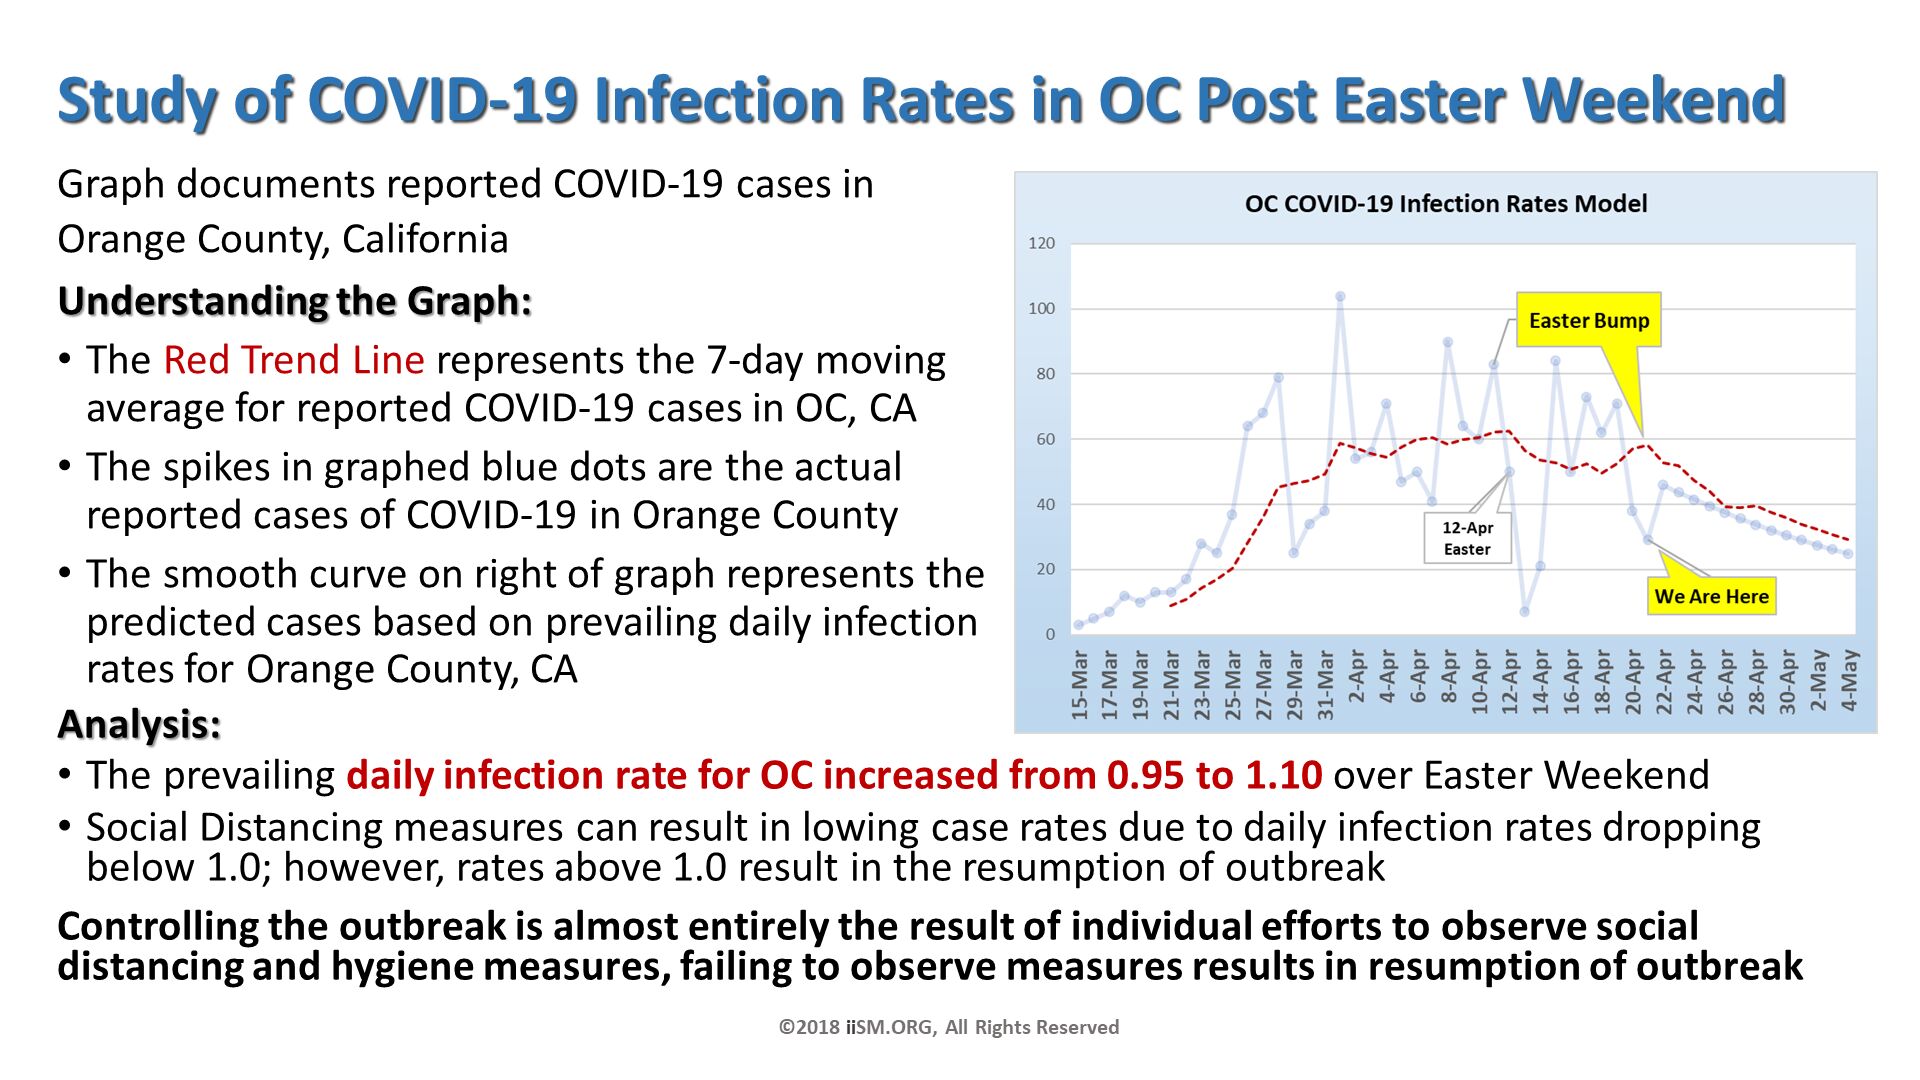 Study of COVID-19 Infection Rates in OC Post Easter Weekend. Graph documents reported COVID-19 cases in Orange County, California
Understanding the Graph:
The Red Trend Line represents the 7-day moving average for reported COVID-19 cases in OC, CA
The spikes in graphed blue dots are the actual reported cases of COVID-19 in Orange County
The smooth curve on right of graph represents the predicted cases based on prevailing daily infection rates for Orange County, CA. ©2018 iiSM.ORG, All Rights Reserved. Analysis:
The prevailing daily infection rate for OC increased from 0.95 to 1.10 over Easter Weekend
Social Distancing measures can result in lowing case rates due to daily infection rates dropping below 1.0; however, rates above 1.0 result in the resumption of outbreak
Controlling the outbreak is almost entirely the result of individual efforts to observe social distancing and hygiene measures, failing to observe measures results in resumption of outbreak. 